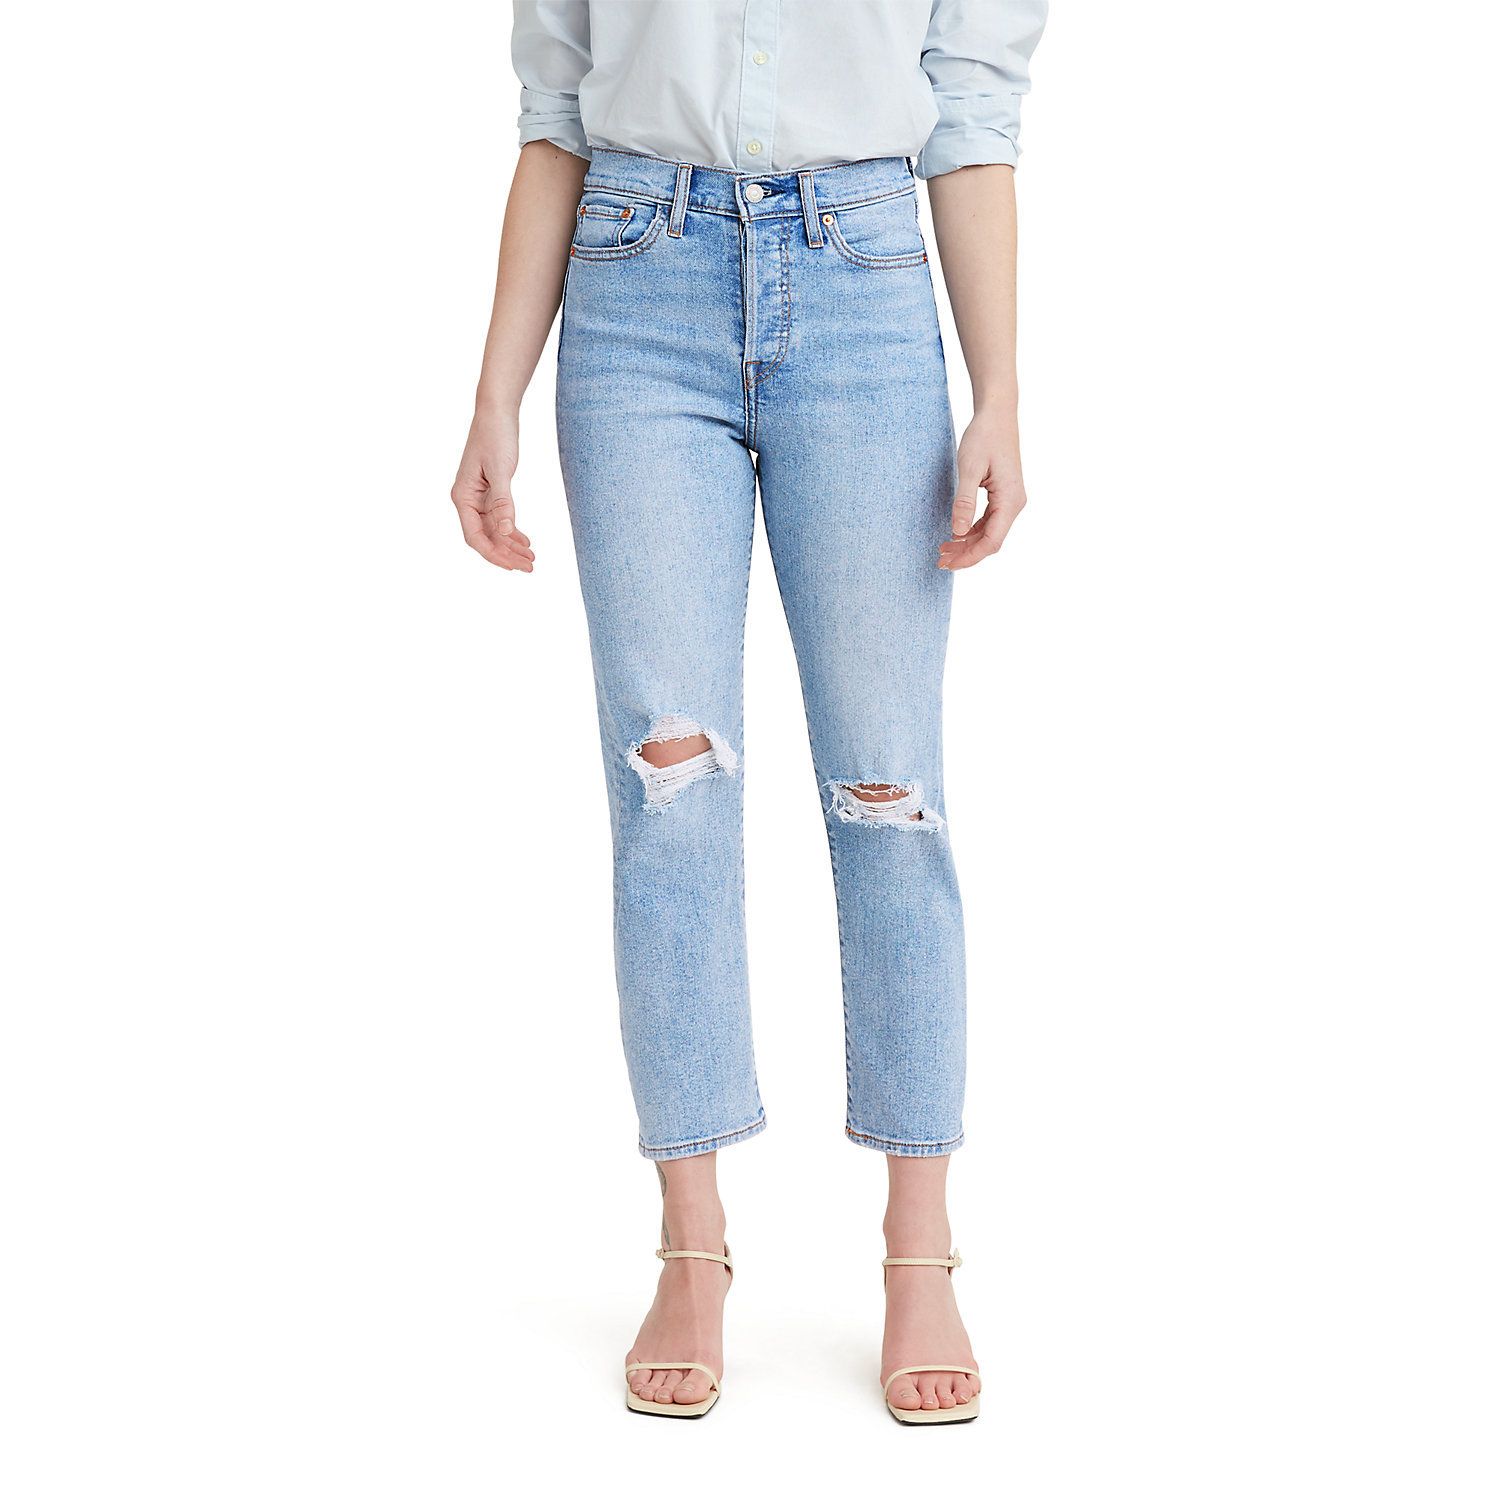 Image for Levi's Women's Wedgie Straight Jeans at Kohl's.